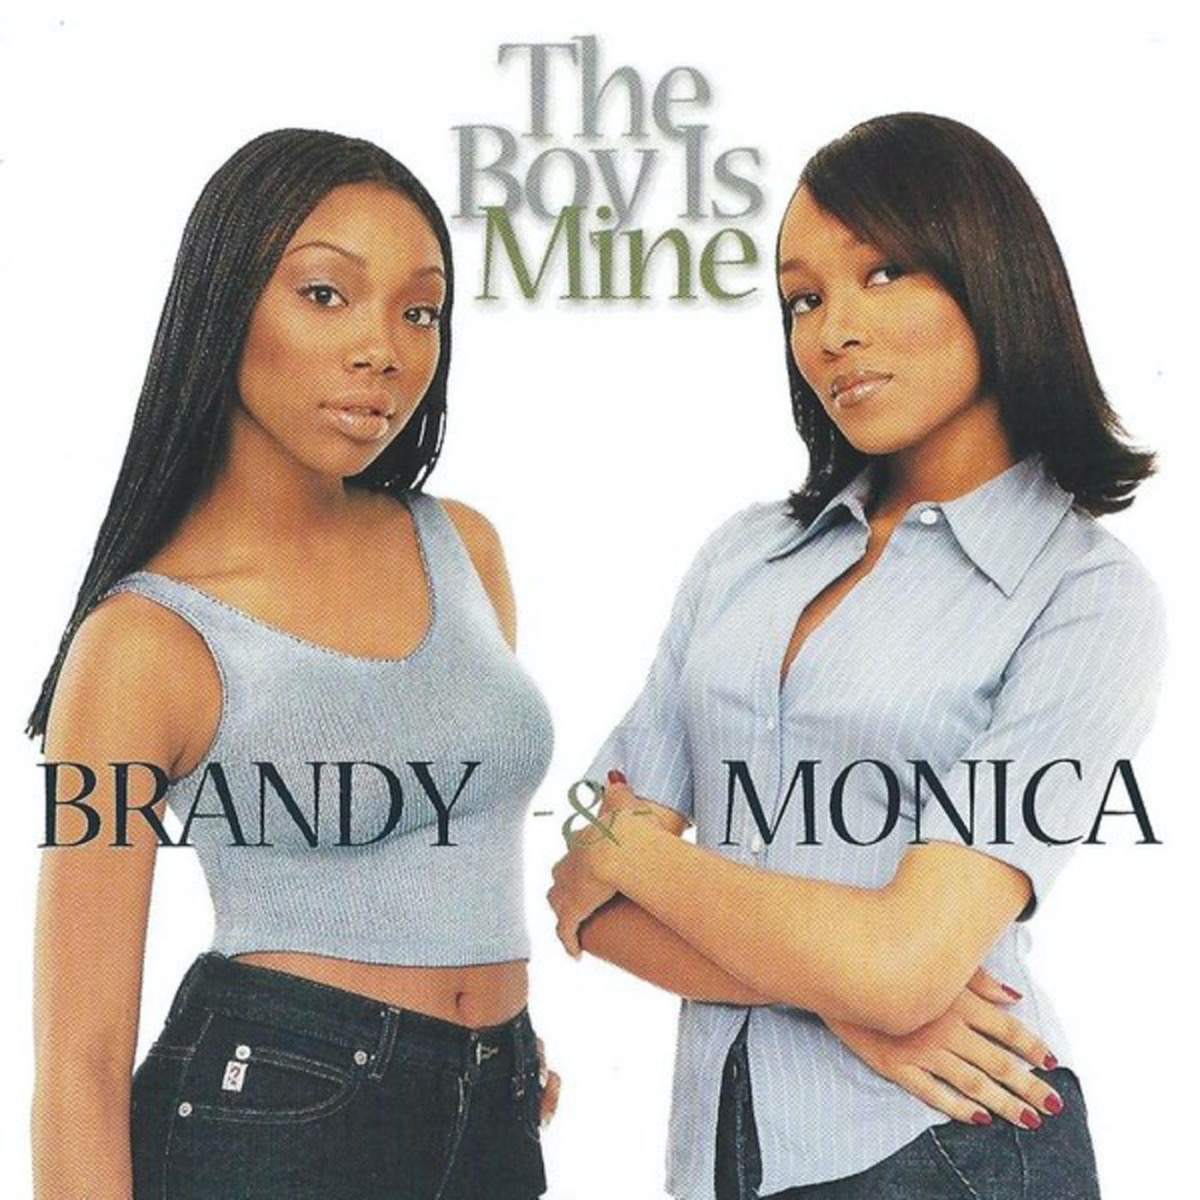 Brandy and Monica "The Boy Is Mine" single cover